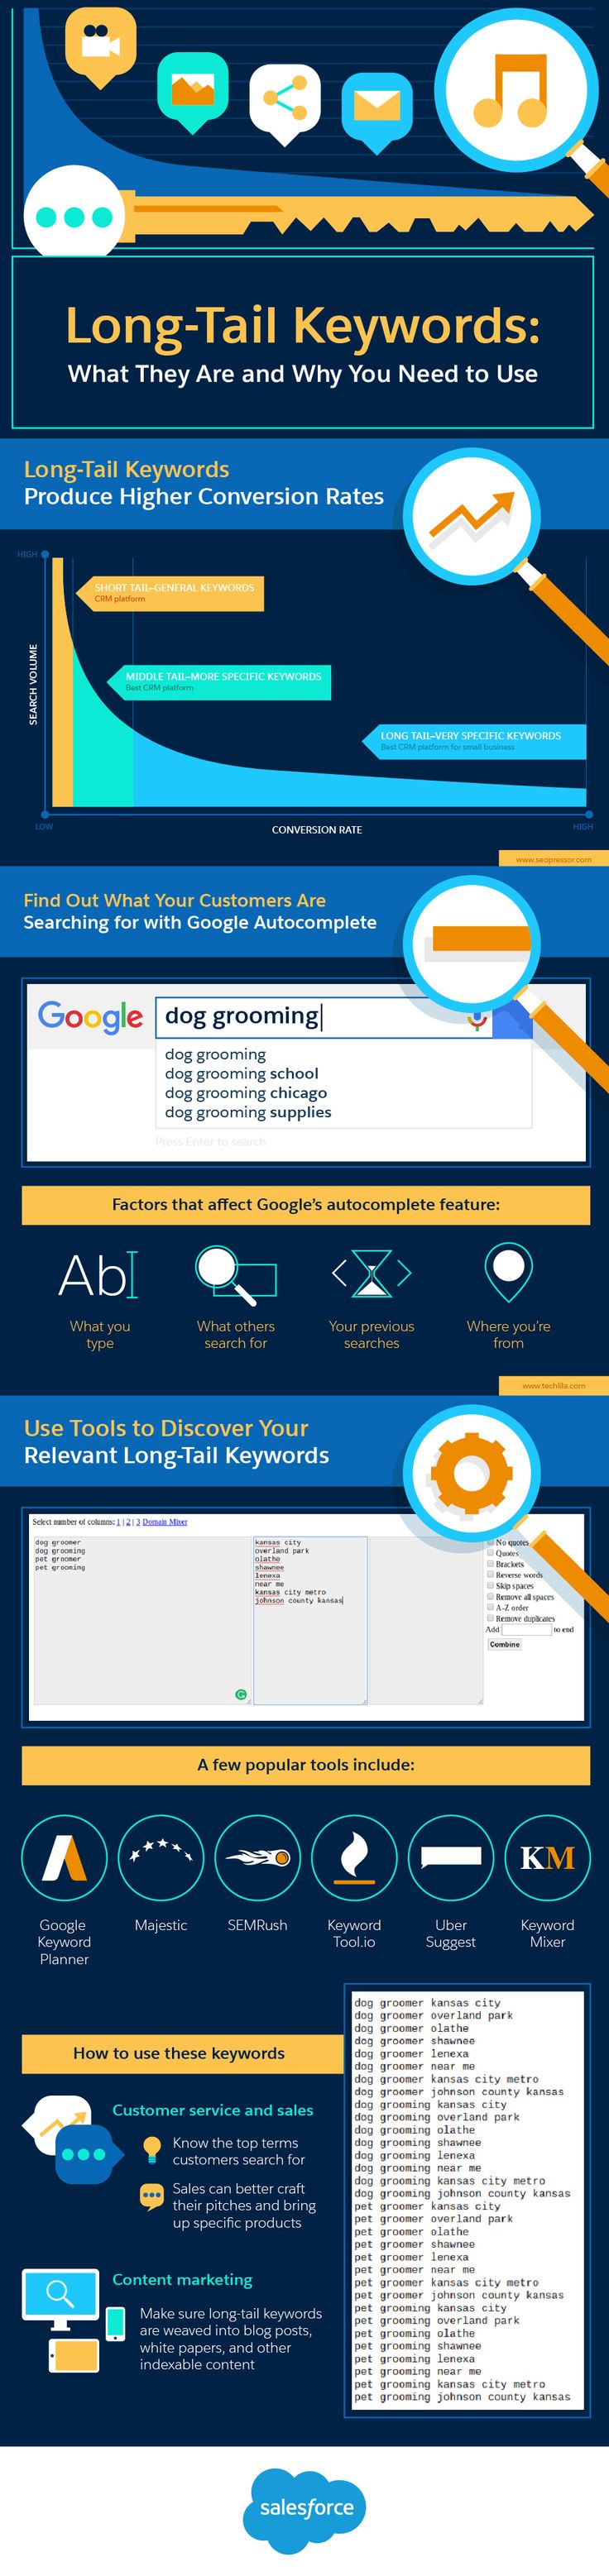 Advertising-Infographics-Long-Tail-Keywords-The-Untapped-Secret-to-Your-Website’s-SEO-Success-Infogra Advertising Infographics : Long-Tail Keywords: The Untapped Secret to Your Website’s SEO Success [Infogra...